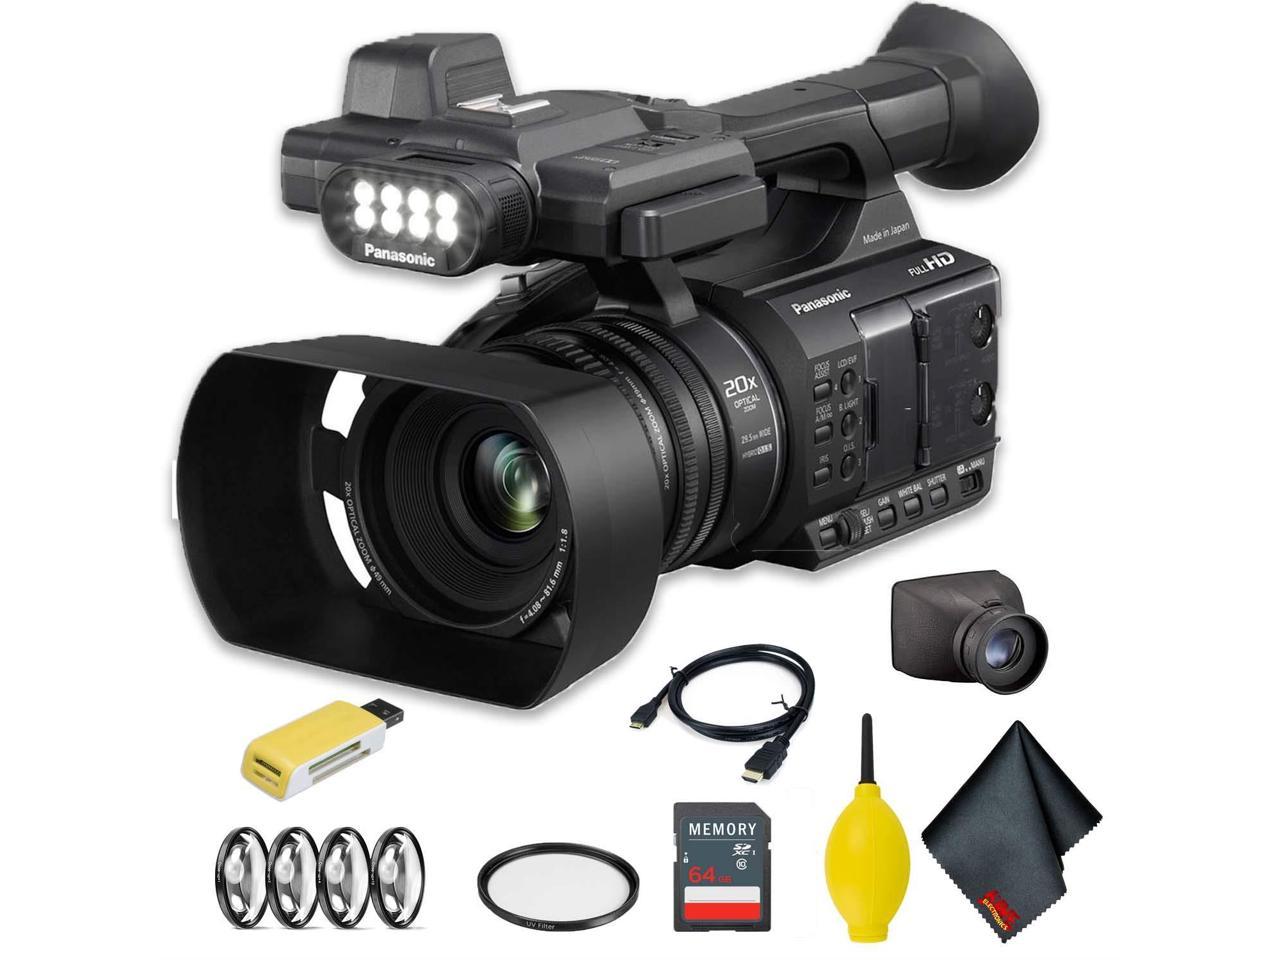 Panasonic� AG-AC30 Full HD Camcorder with Touch Panel LCD Viewscreen and Built-In LED Light� Intermediate Accessory Bundle w/ Viewfinder & More